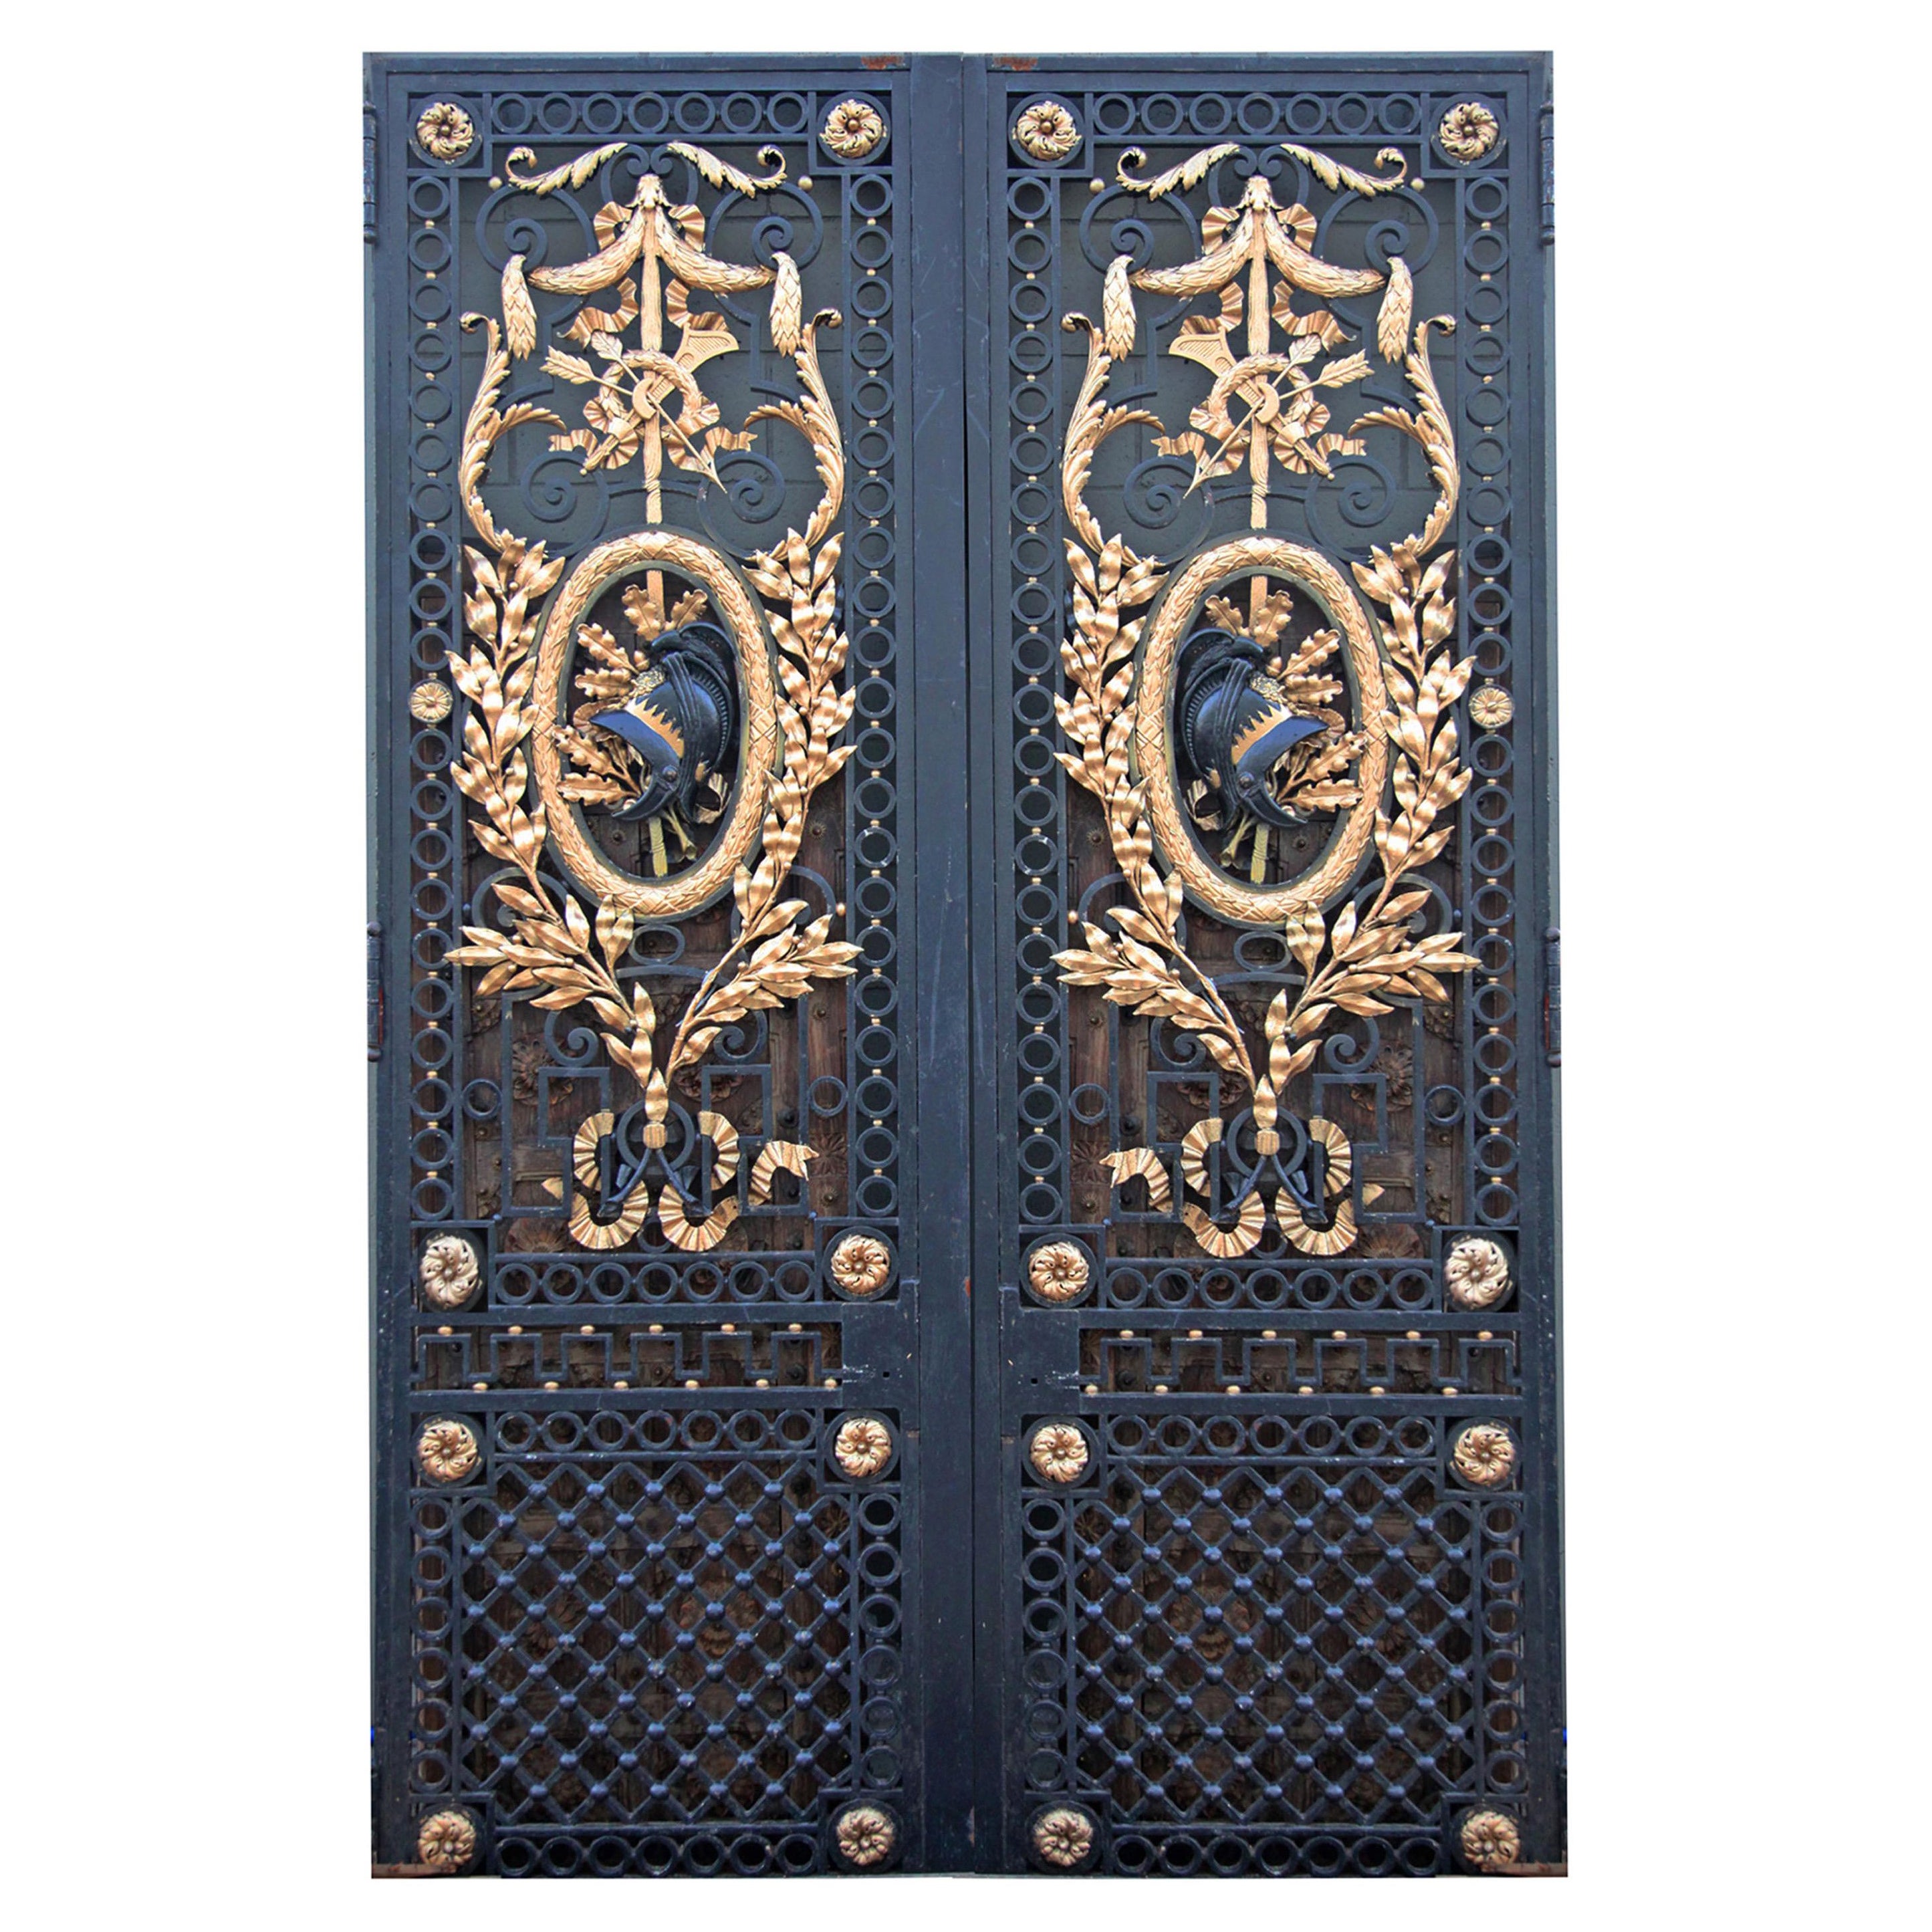 Historical Monumental Doors from VIP Politician Lounge Washington DC For Sale